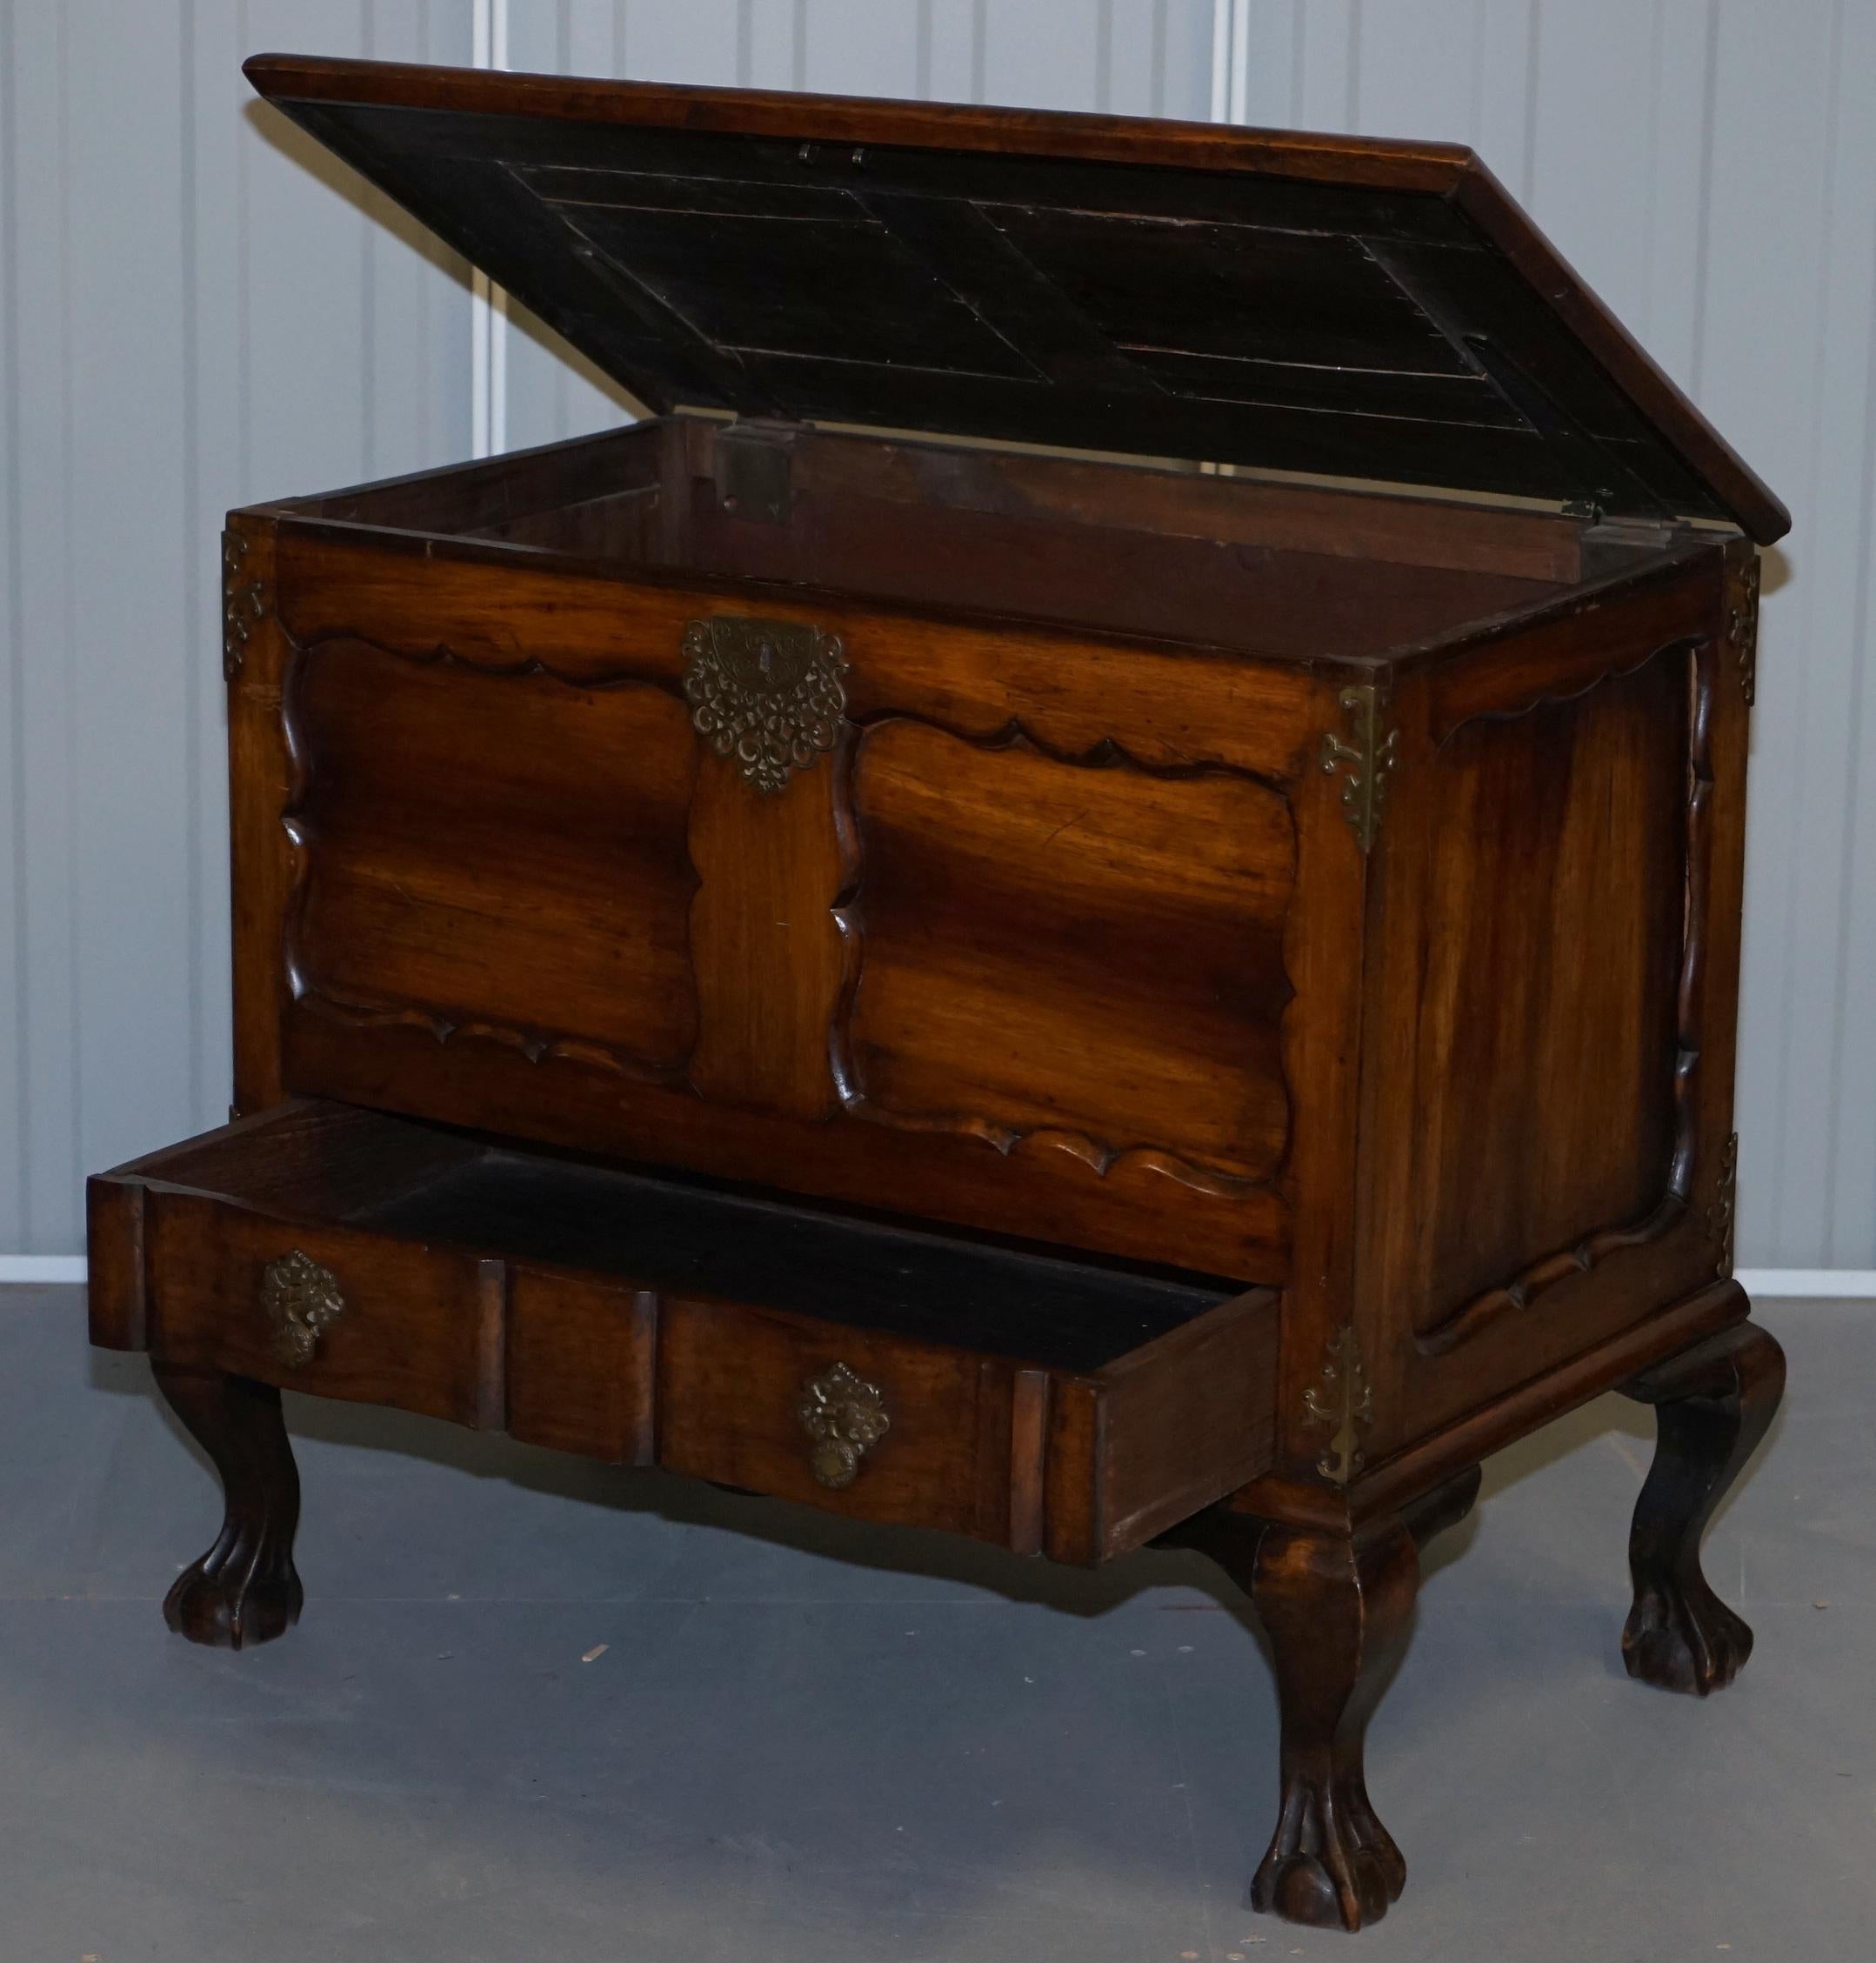 English Lovely Vintage Hardwood Ornately Carved Trunk Chest with Drawer Claw & Ball Legs For Sale